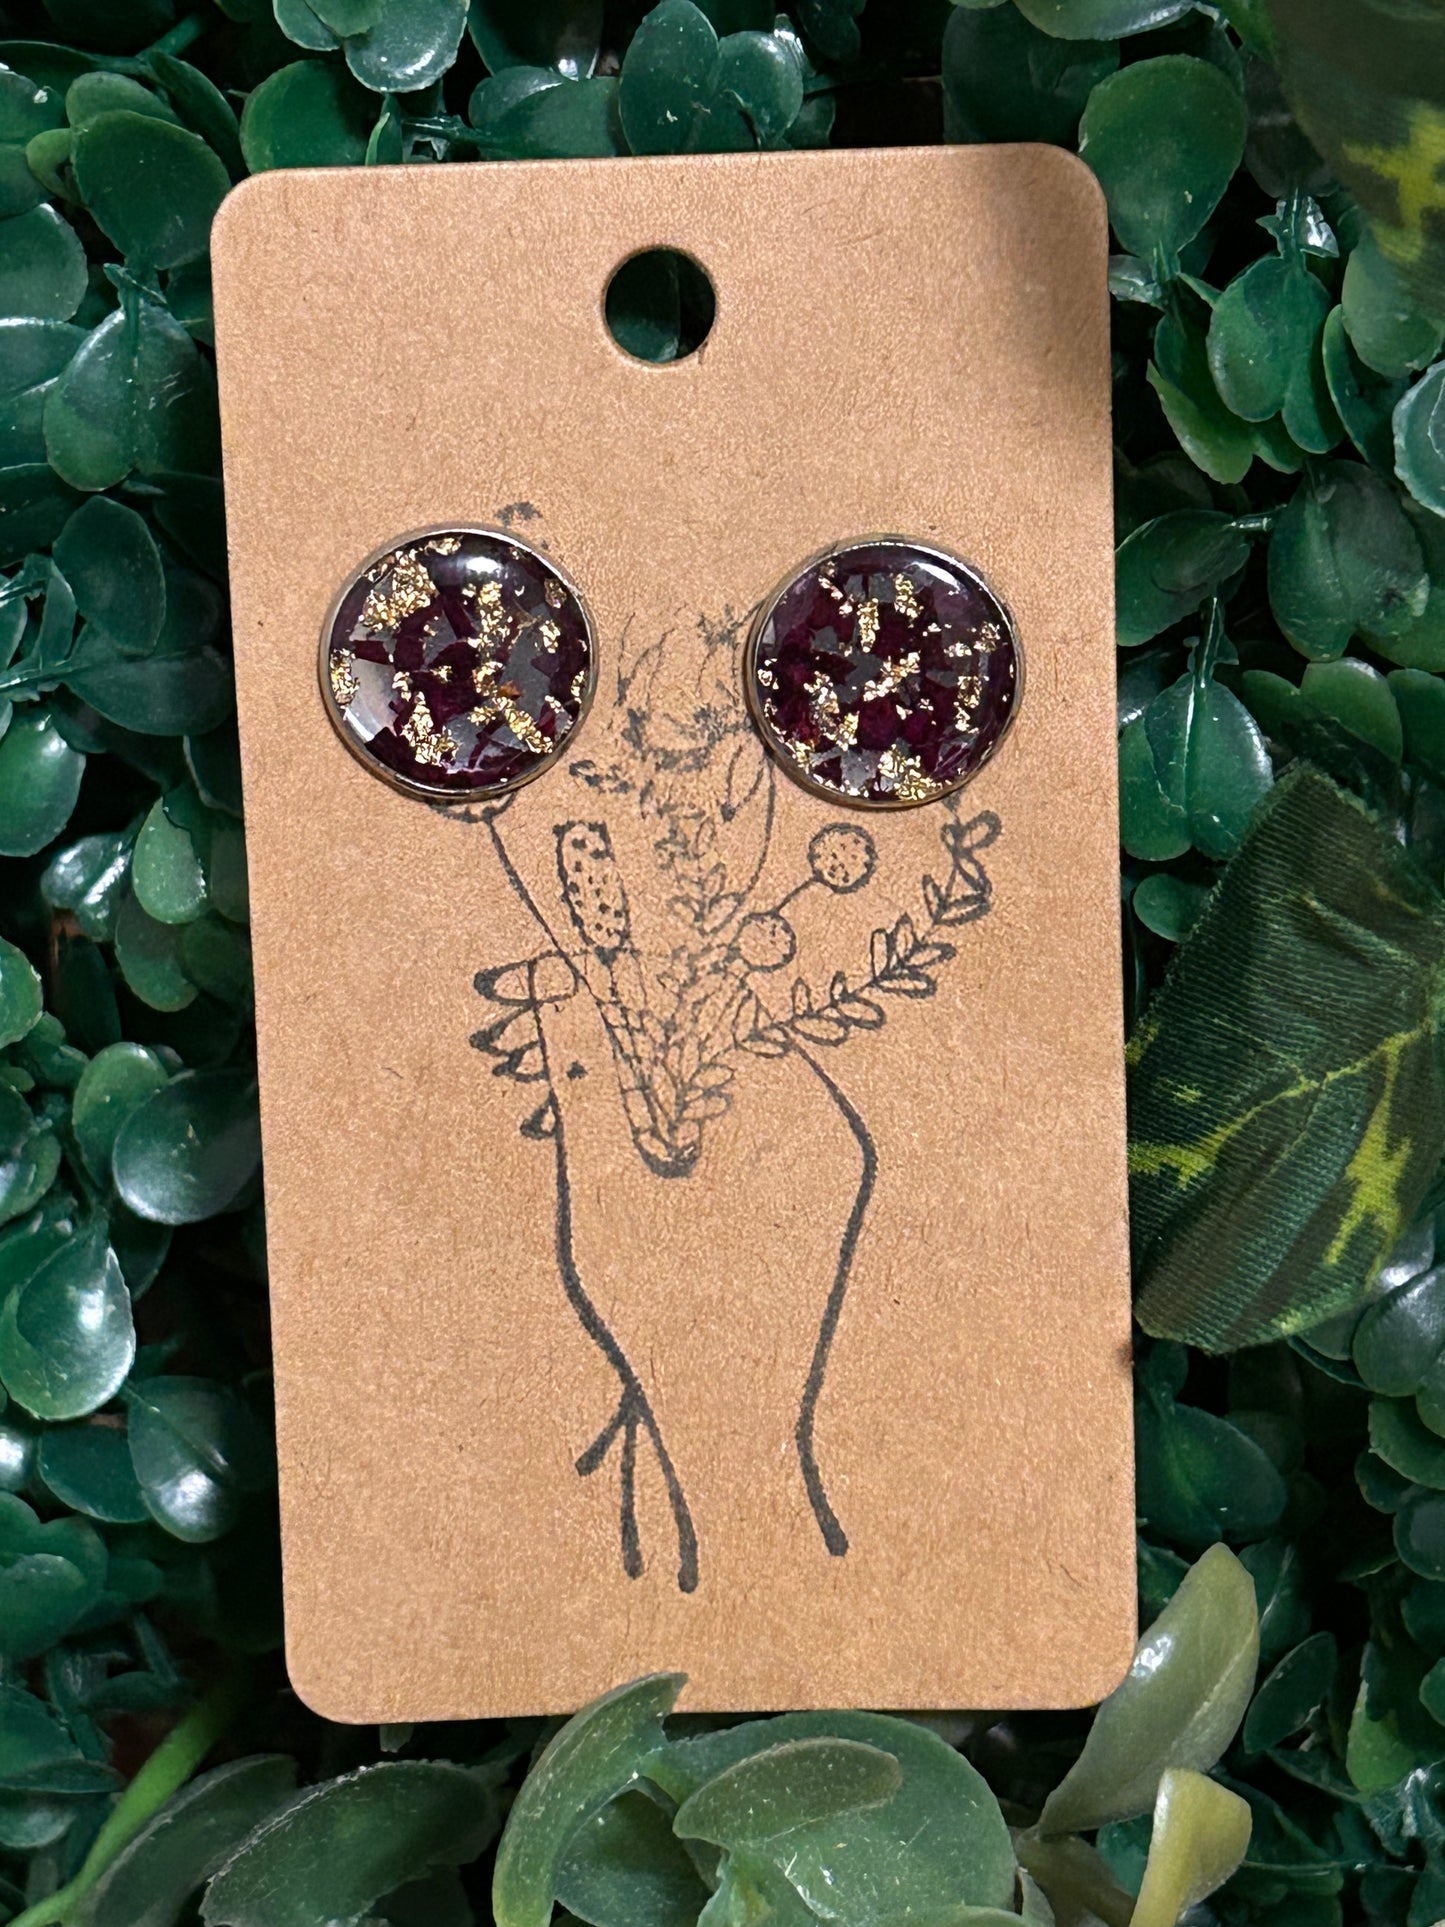 Rose pedals with gold flake stud earrings